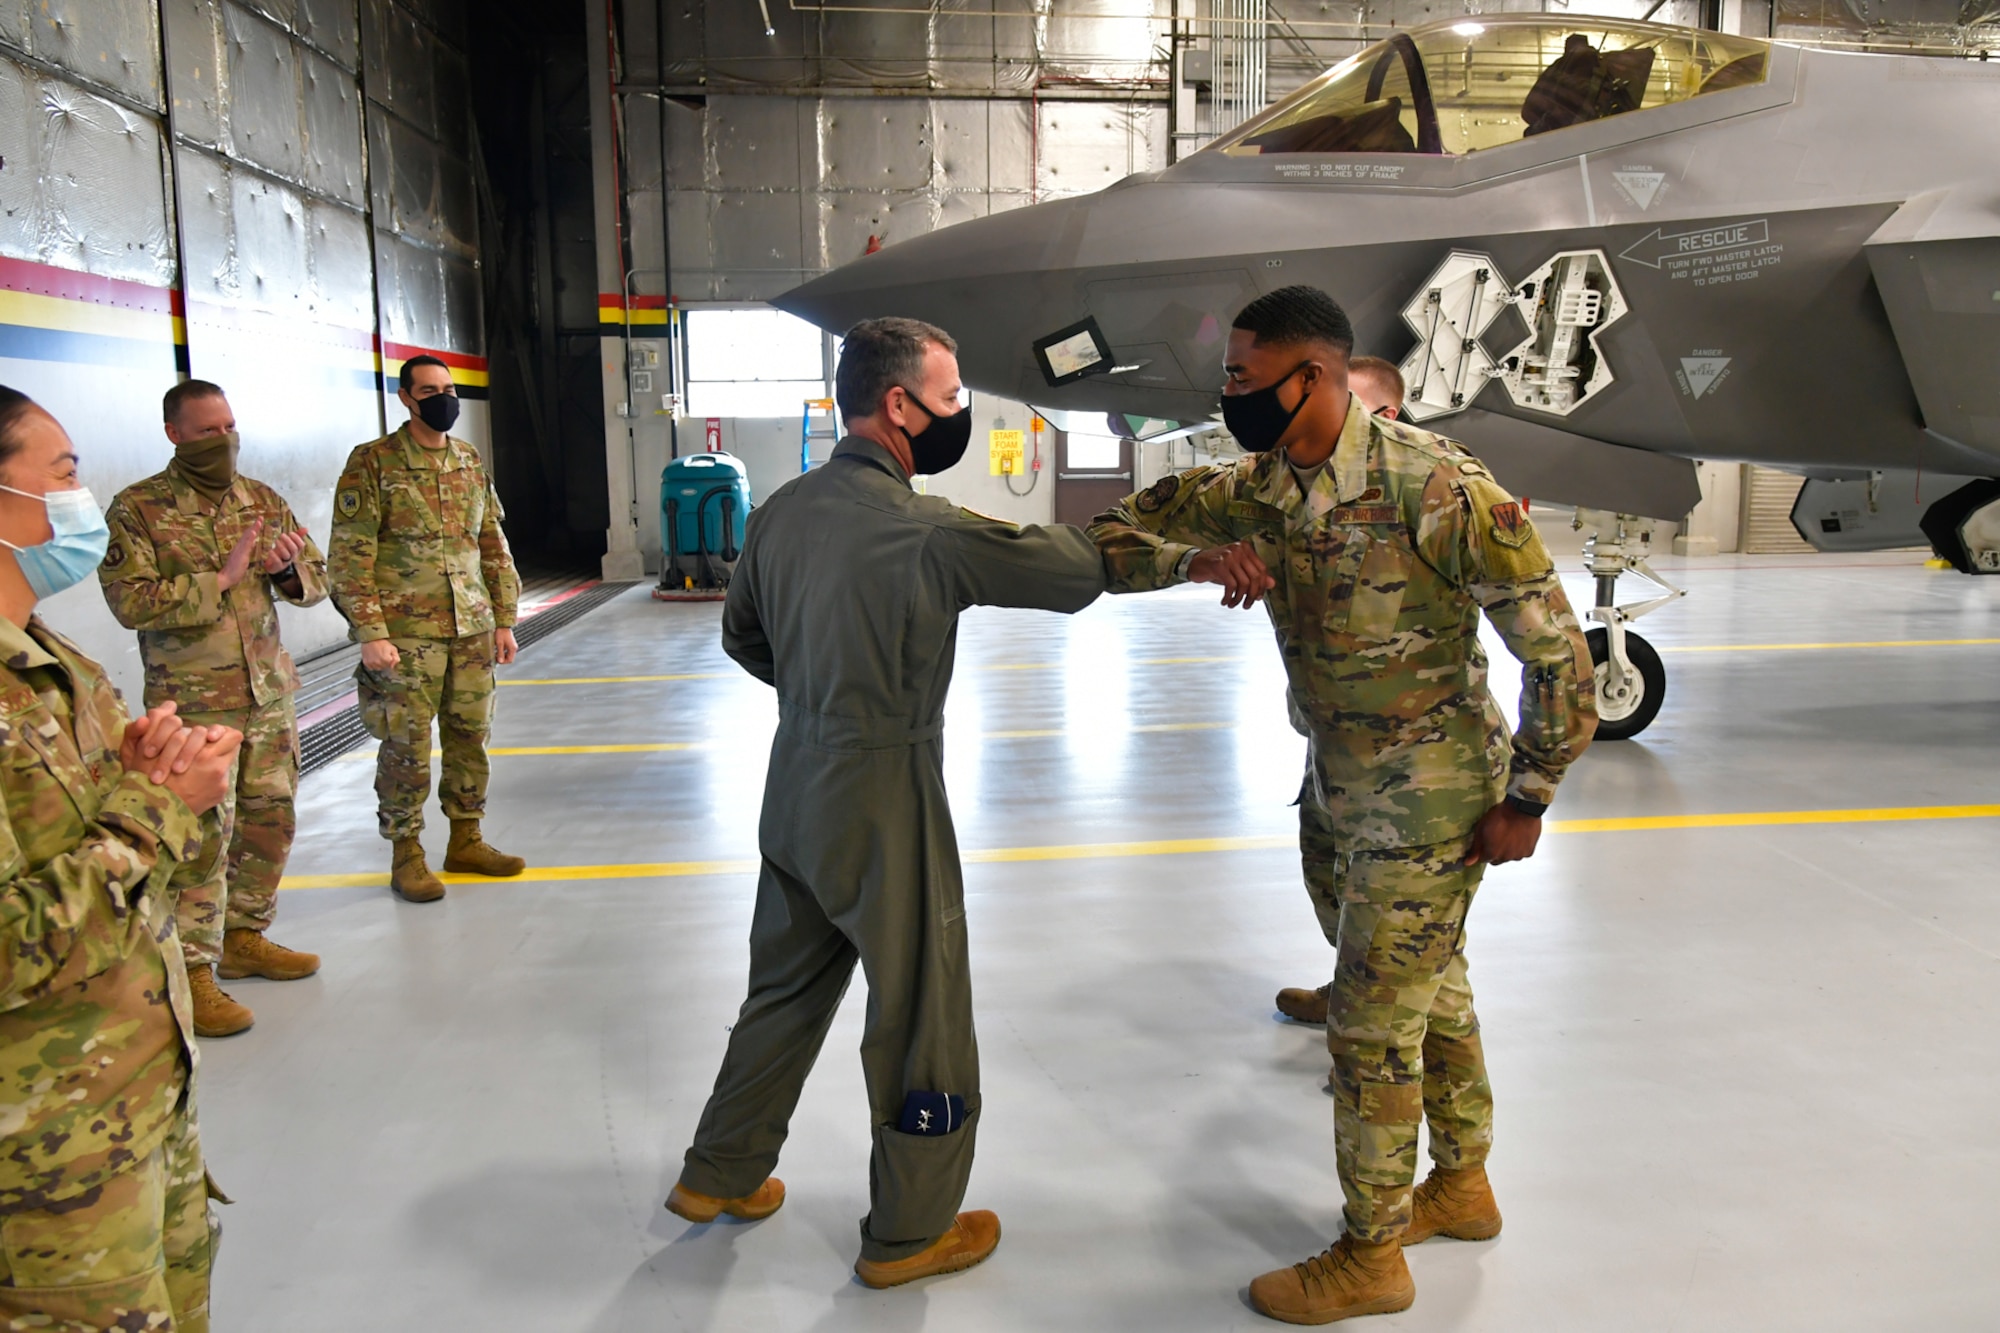 A photo of Maj. Gen. Chad Franks visit to Hill Air Force Base.